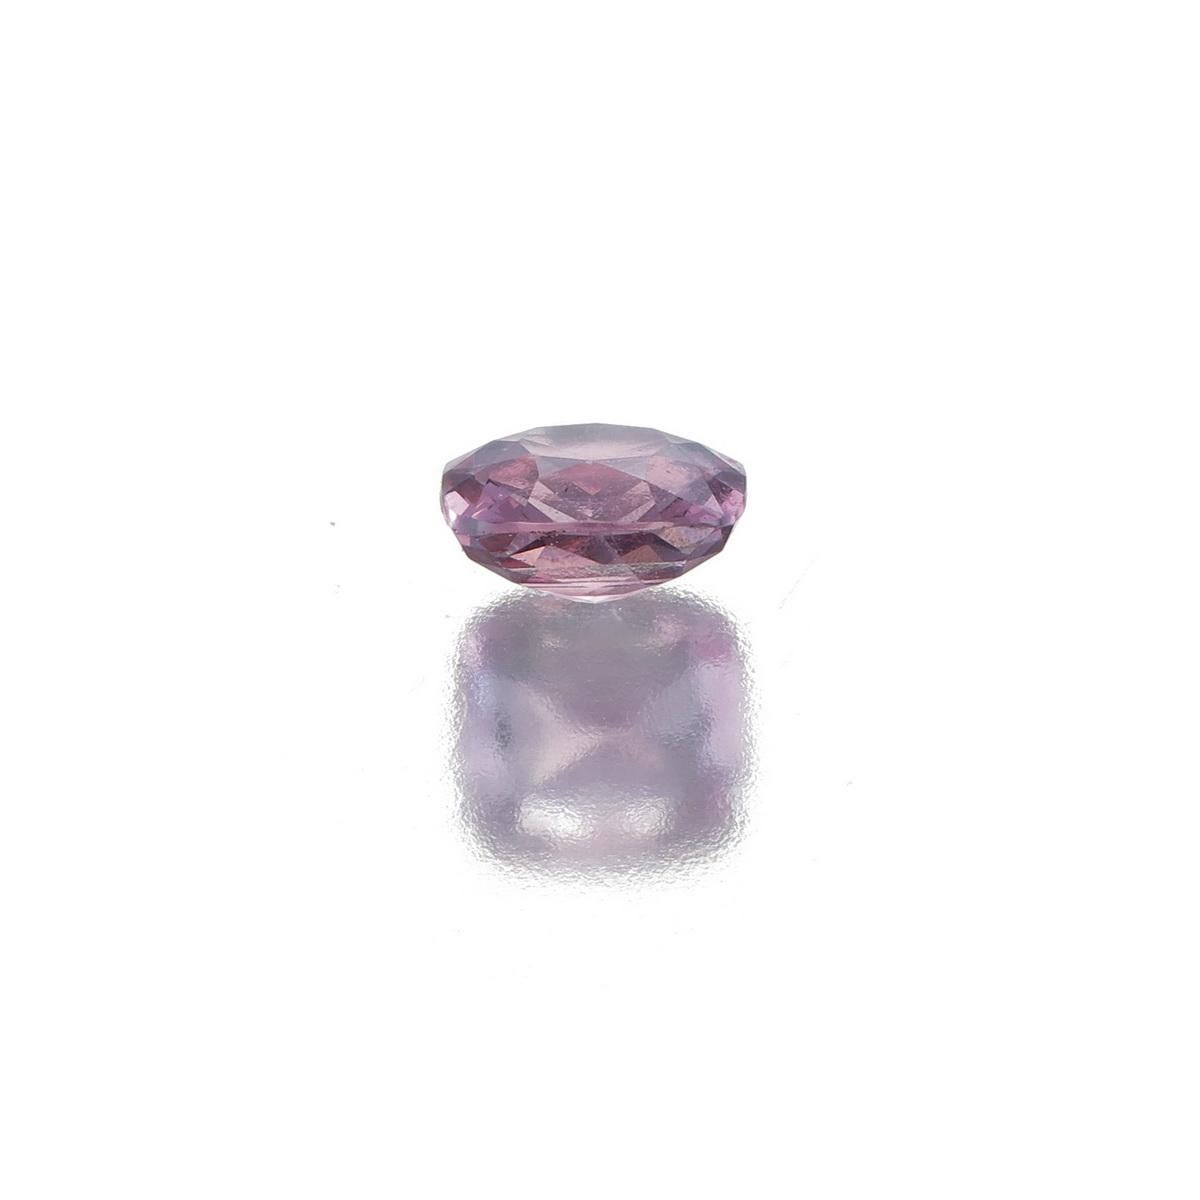 Cushion Cut 1.06 Carat Natural Pink Spinel from Burma No Heat For Sale